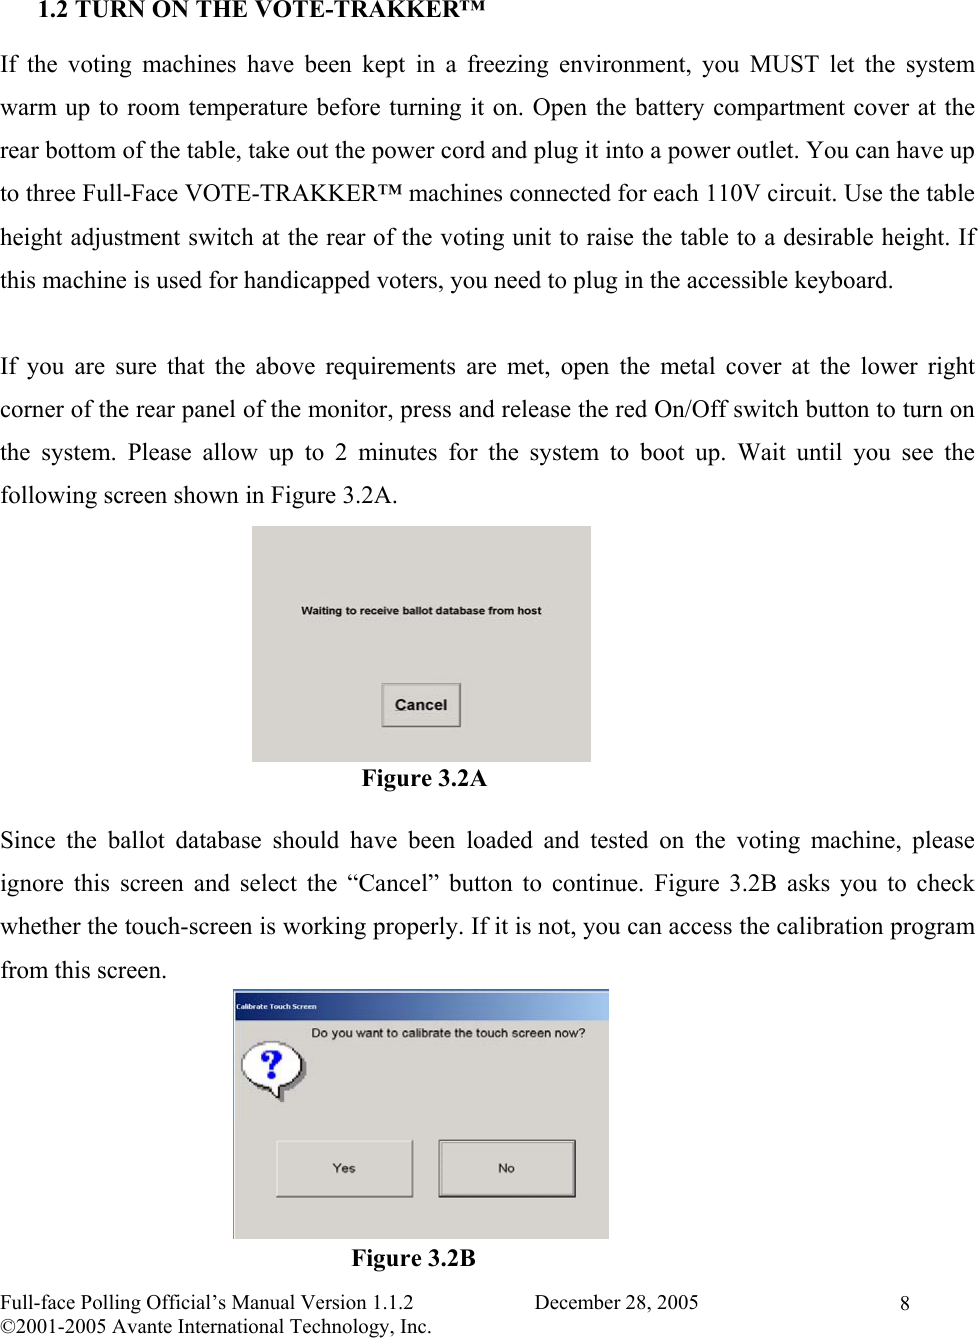    Full-face Polling Official’s Manual Version 1.1.2                       December 28, 2005 ©2001-2005 Avante International Technology, Inc.   8 1.2 TURN ON THE VOTE-TRAKKER™ If the voting machines have been kept in a freezing environment, you MUST let the system warm up to room temperature before turning it on. Open the battery compartment cover at the rear bottom of the table, take out the power cord and plug it into a power outlet. You can have up to three Full-Face VOTE-TRAKKER™ machines connected for each 110V circuit. Use the table height adjustment switch at the rear of the voting unit to raise the table to a desirable height. If this machine is used for handicapped voters, you need to plug in the accessible keyboard.  If you are sure that the above requirements are met, open the metal cover at the lower right corner of the rear panel of the monitor, press and release the red On/Off switch button to turn on the system. Please allow up to 2 minutes for the system to boot up. Wait until you see the following screen shown in Figure 3.2A.        Since the ballot database should have been loaded and tested on the voting machine, please ignore this screen and select the “Cancel” button to continue. Figure 3.2B asks you to check whether the touch-screen is working properly. If it is not, you can access the calibration program from this screen.             Figure 3.2A Figure 3.2B 